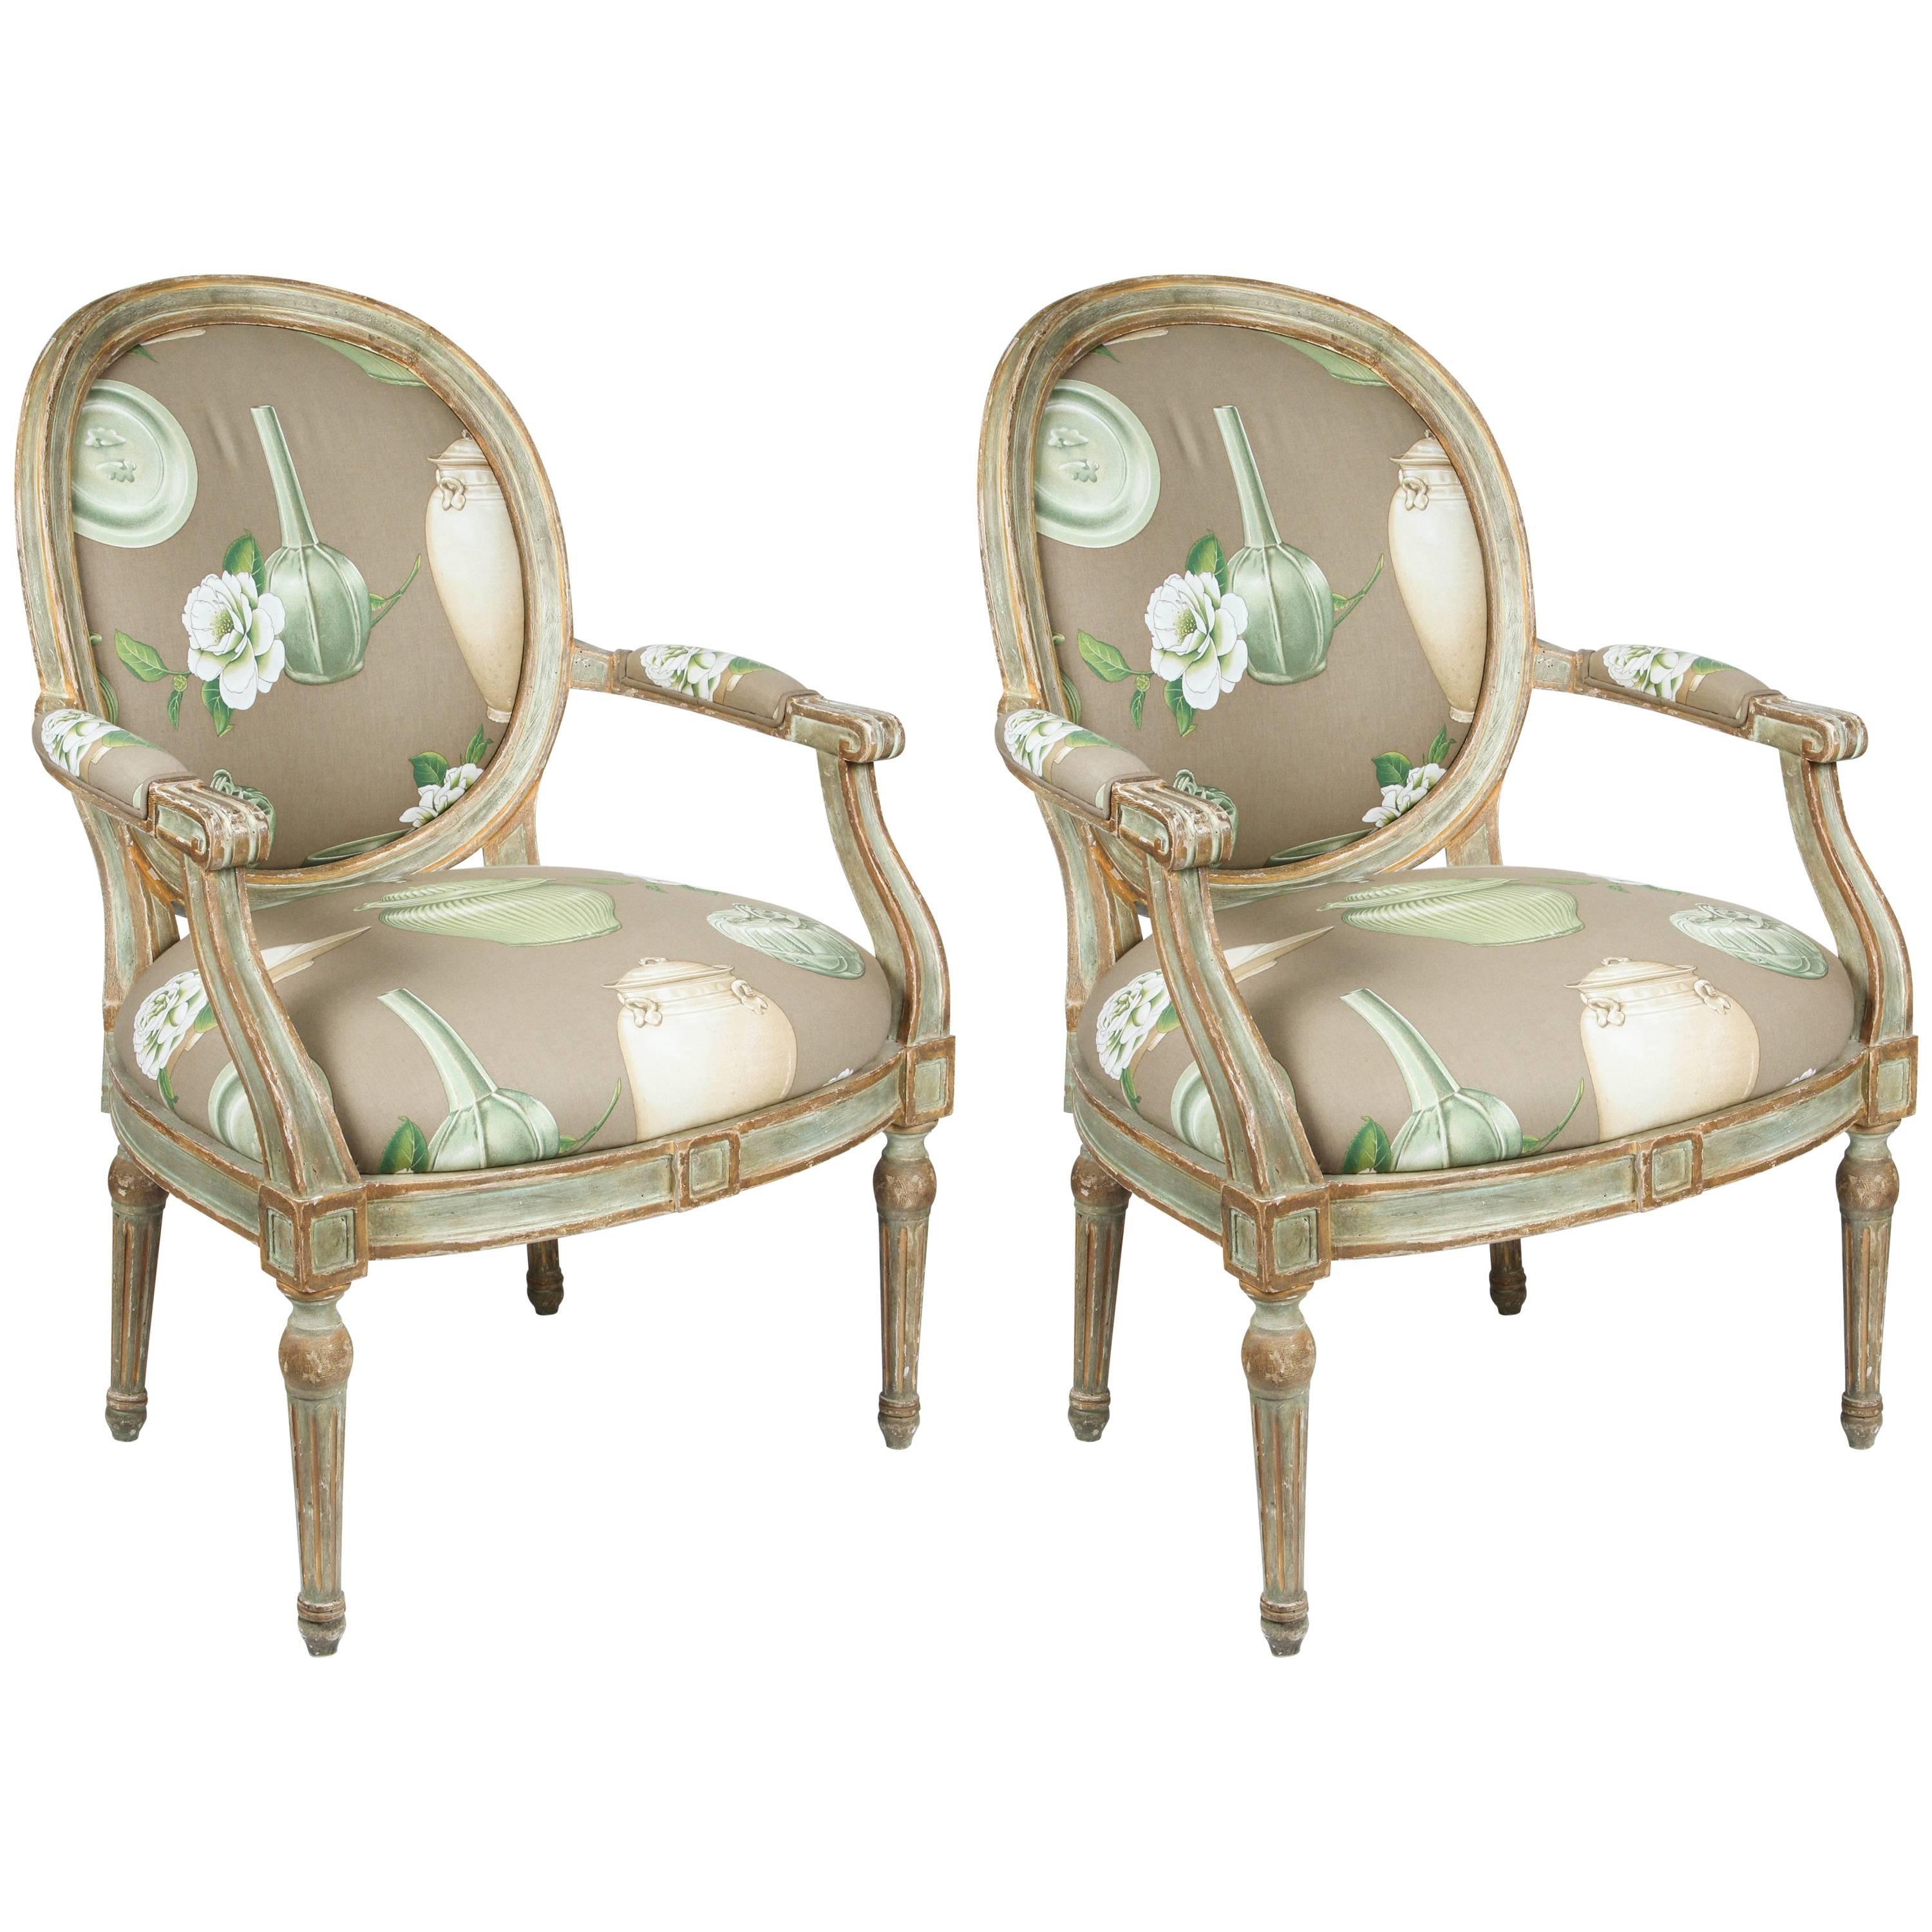 Pair of Louis XVI Style Oval-Back Armchairs